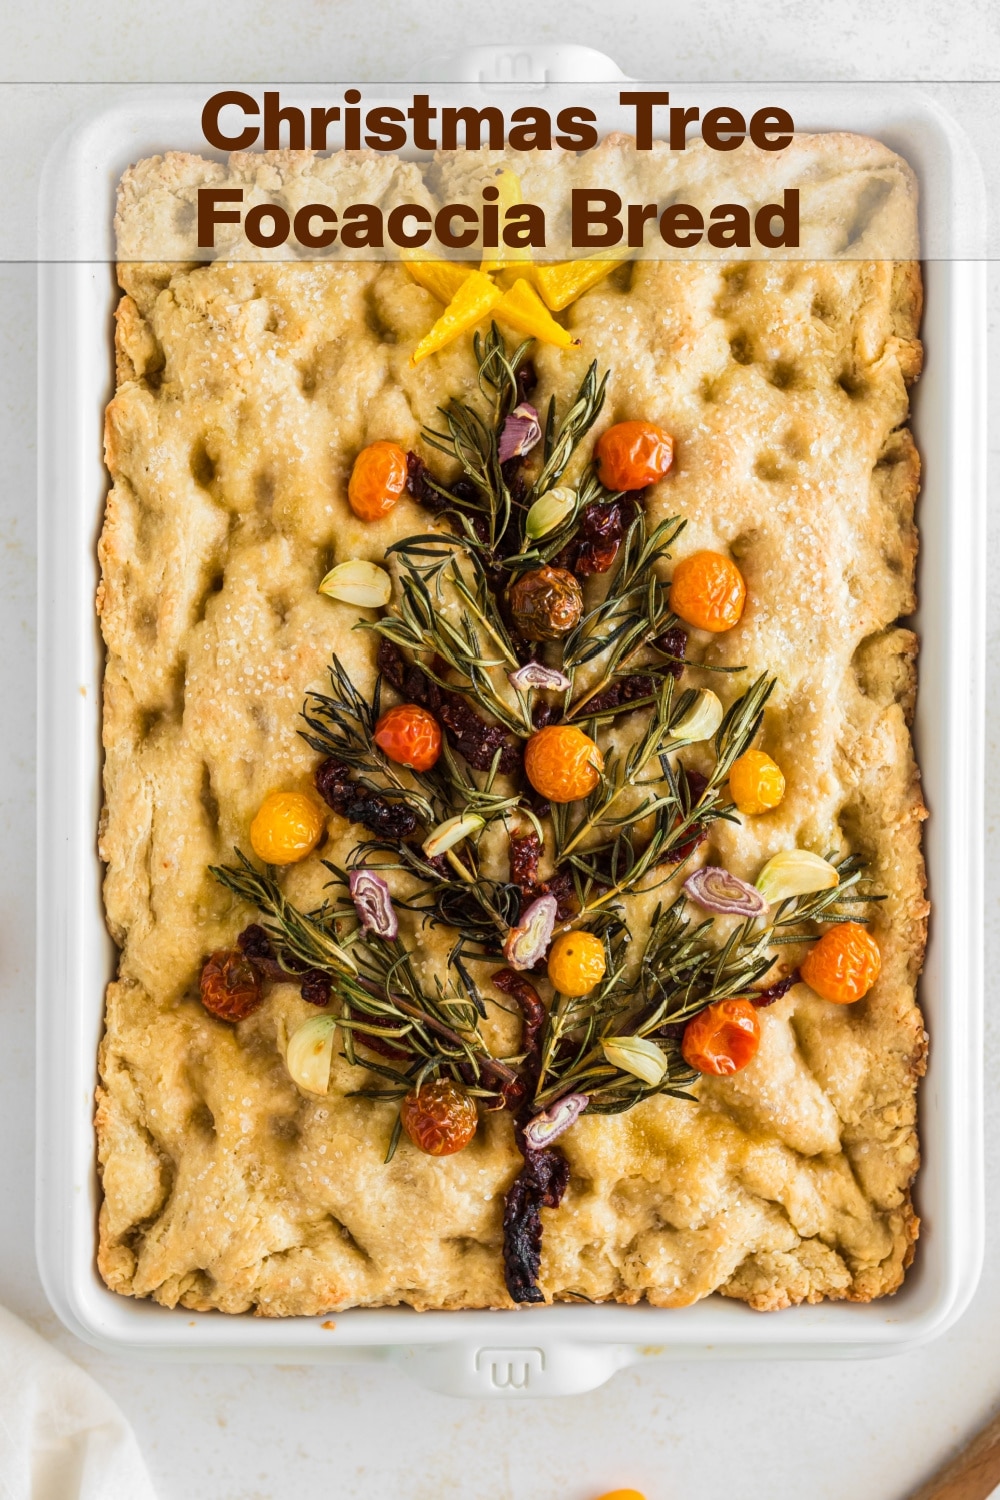 Transform your holiday spread into an edible centerpiece with this Christmas Tree Focaccia Bread - where a savory canvas of golden dough meets a merry medley  of festive "evergreen" made from rosemary sprigs, tomatoes, shallots and garlic. It's as flavorful as it is eye-catching.  via @cmpollak1